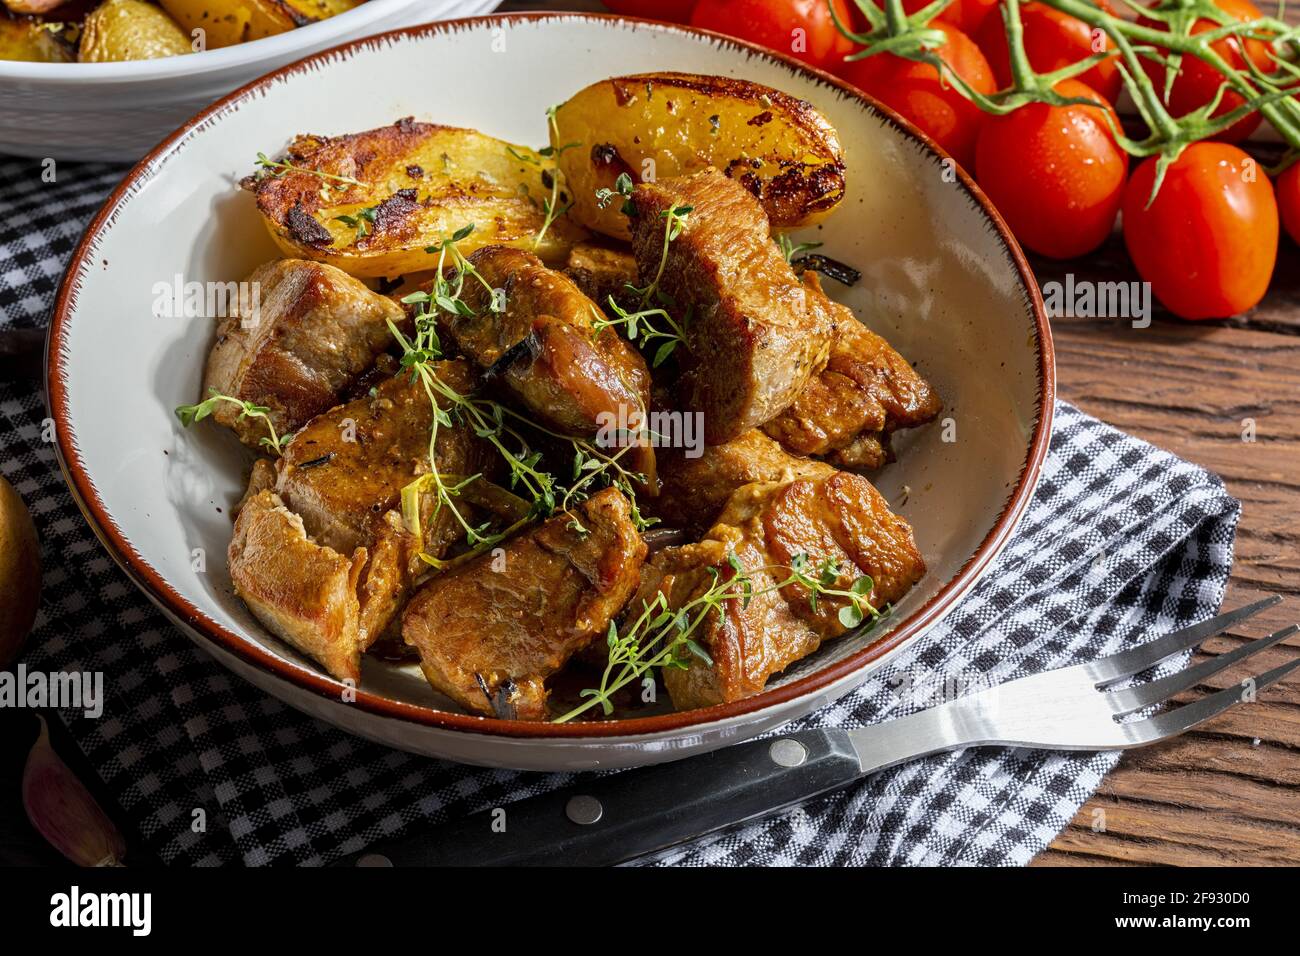 Appetizing stew of pork tenderloin meat cooked in the wok, cut into cubes. With roasted and golden potatoes, garlic, salt, oregano and fresh tomatoes. Stock Photo